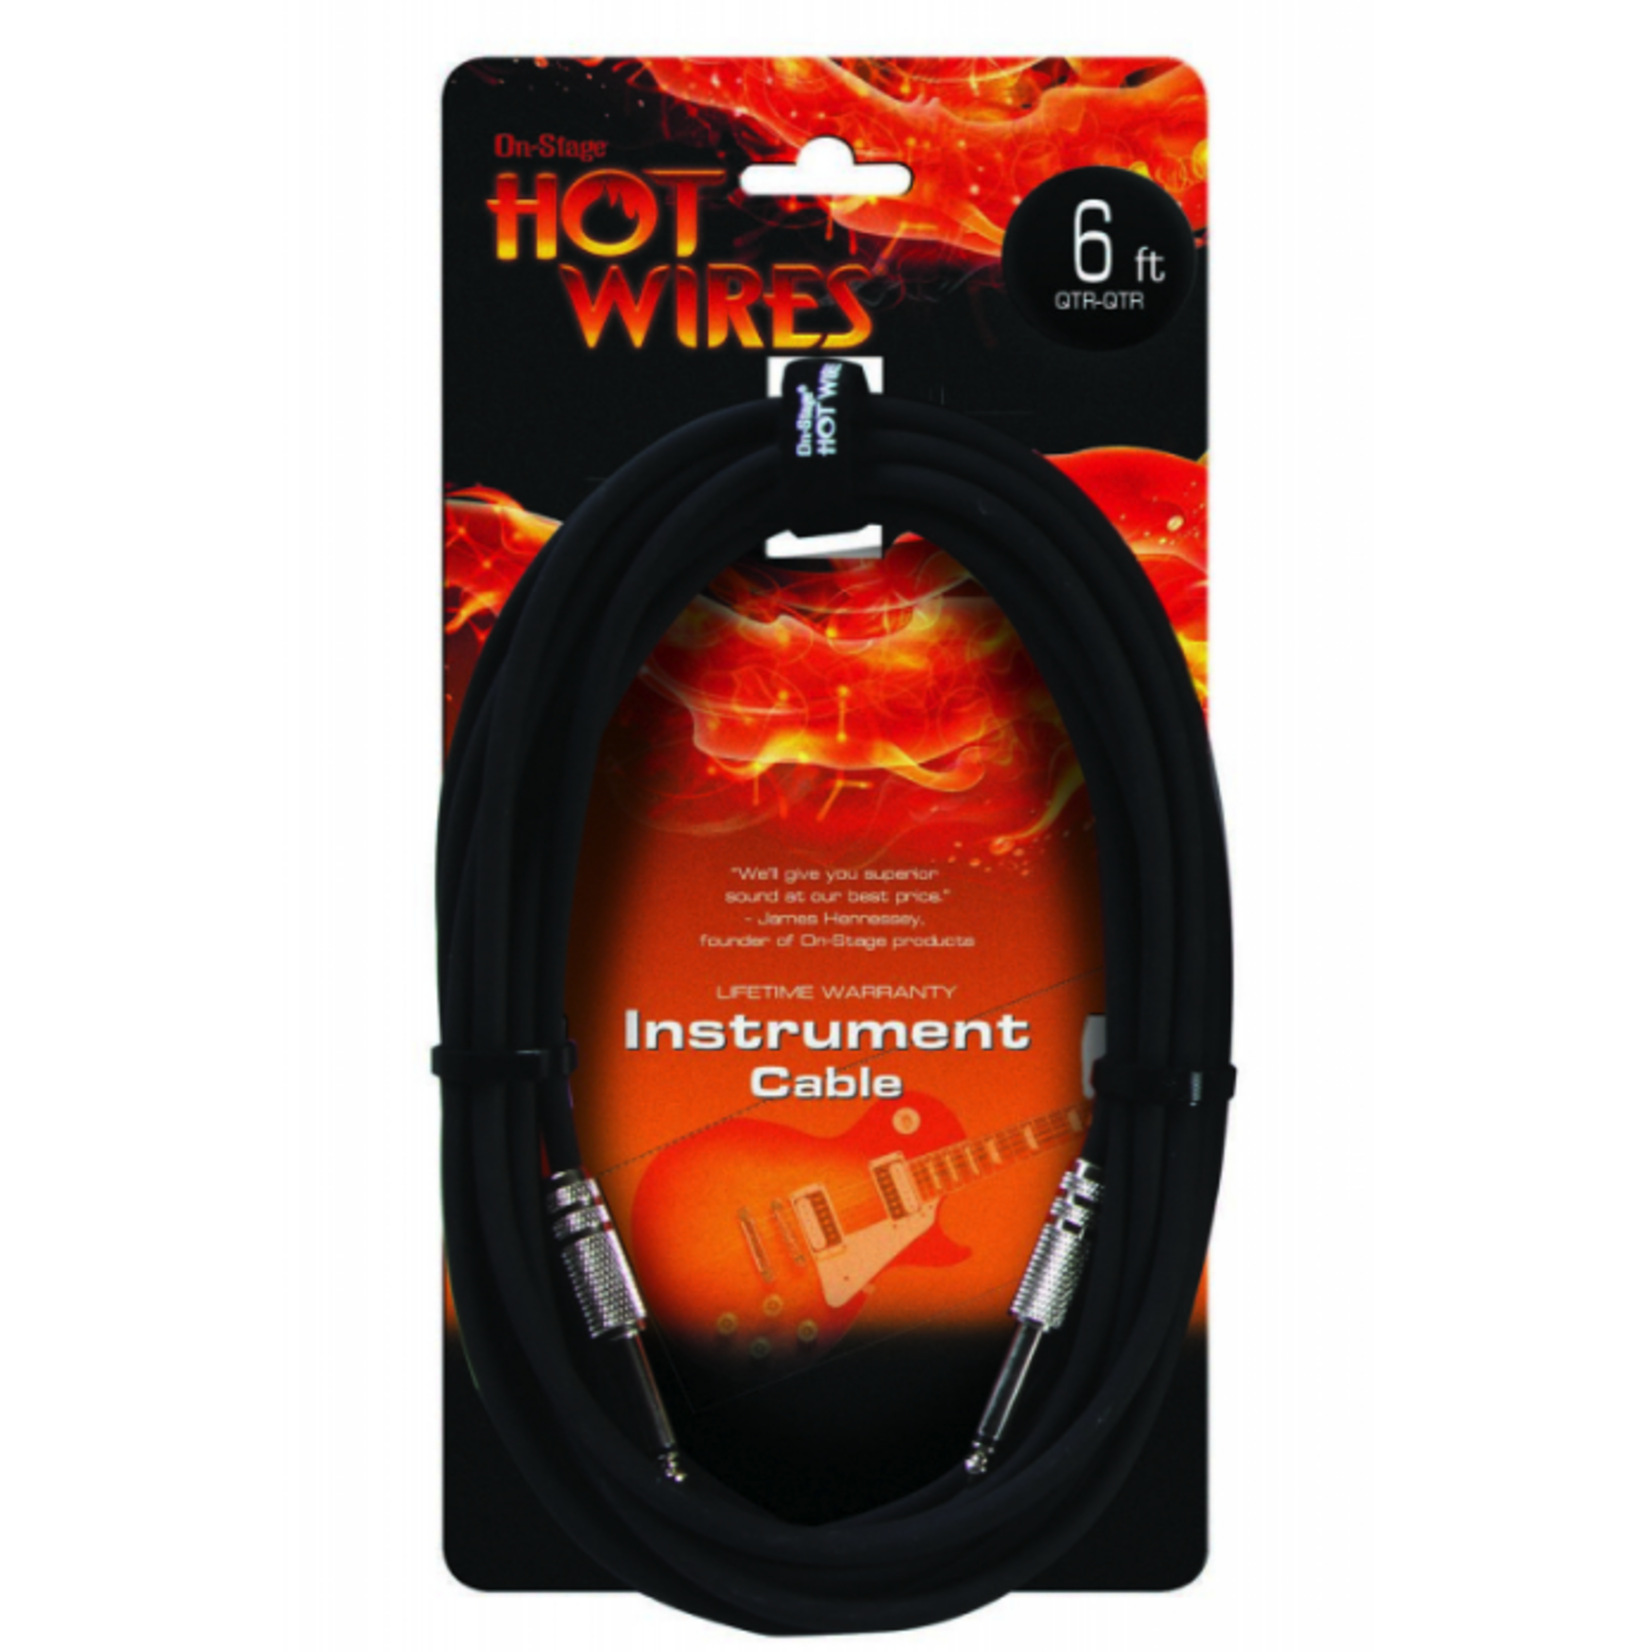 On-Stage 6' Hotwire Instrument Cable